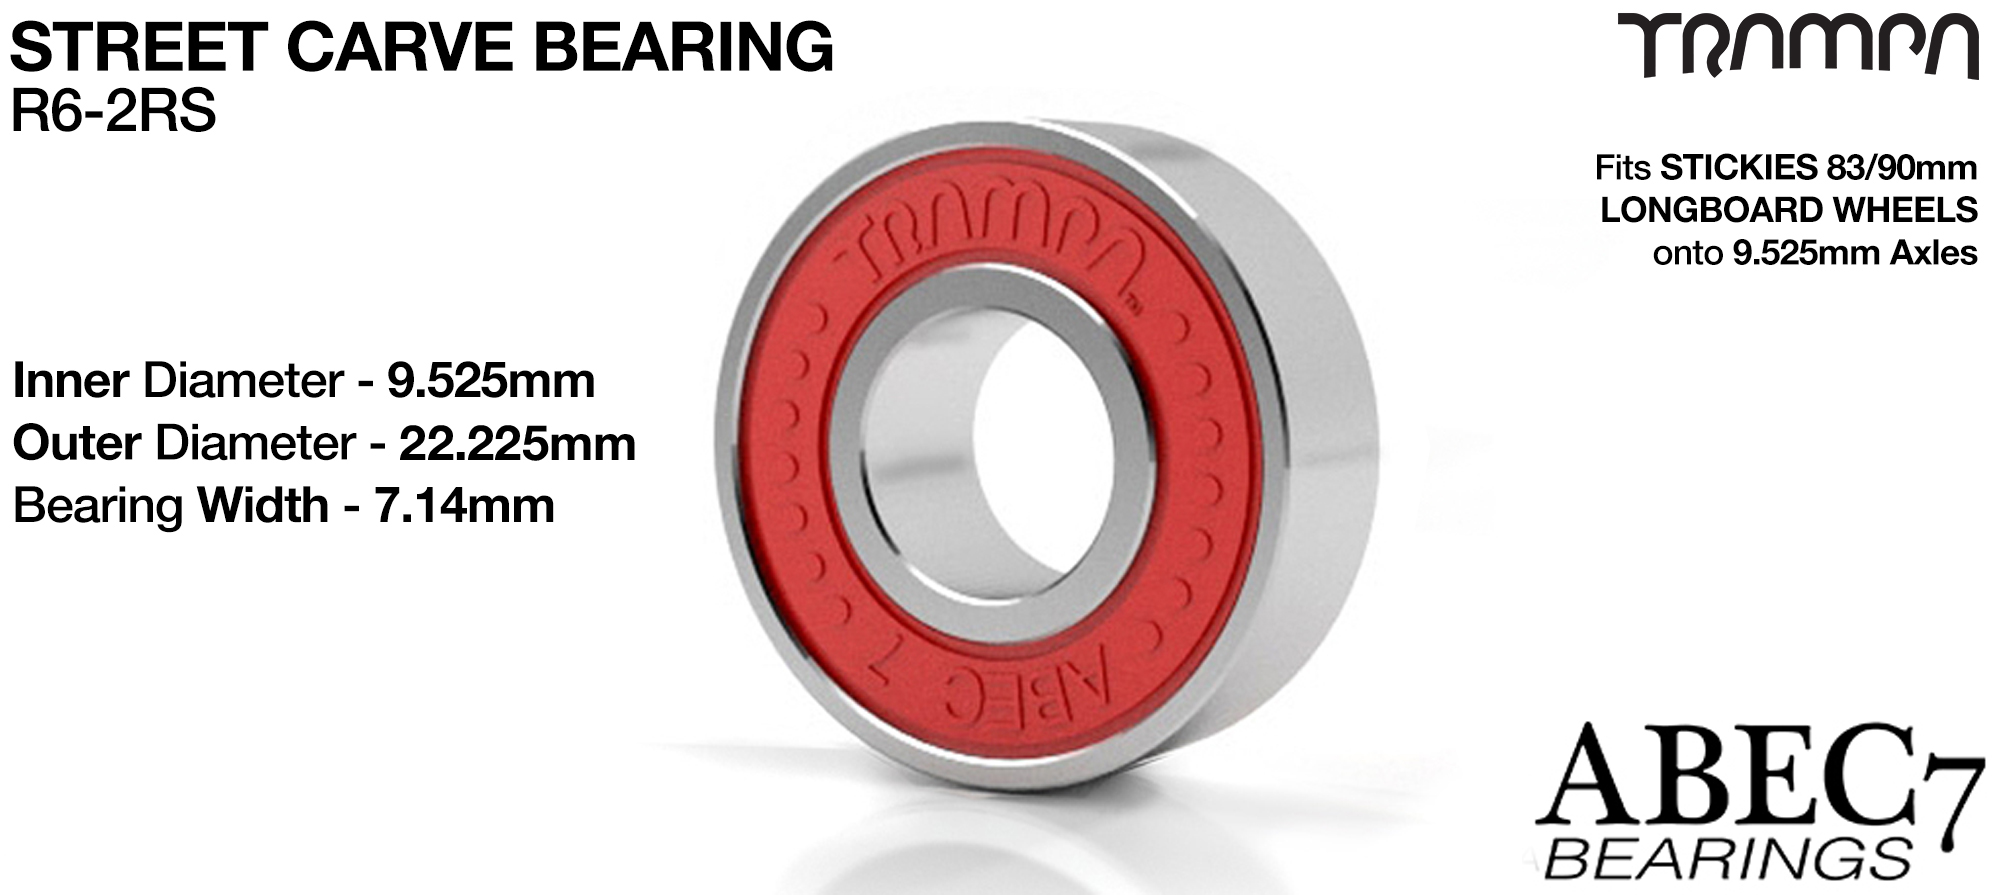 R6 2RS Abec 7 TRAMPA STREET CARVE Bearing used to fit STICKIES Longboard Wheels to 9.525mm Axels (9.525 x 22.225 x 7.14mm) - RED